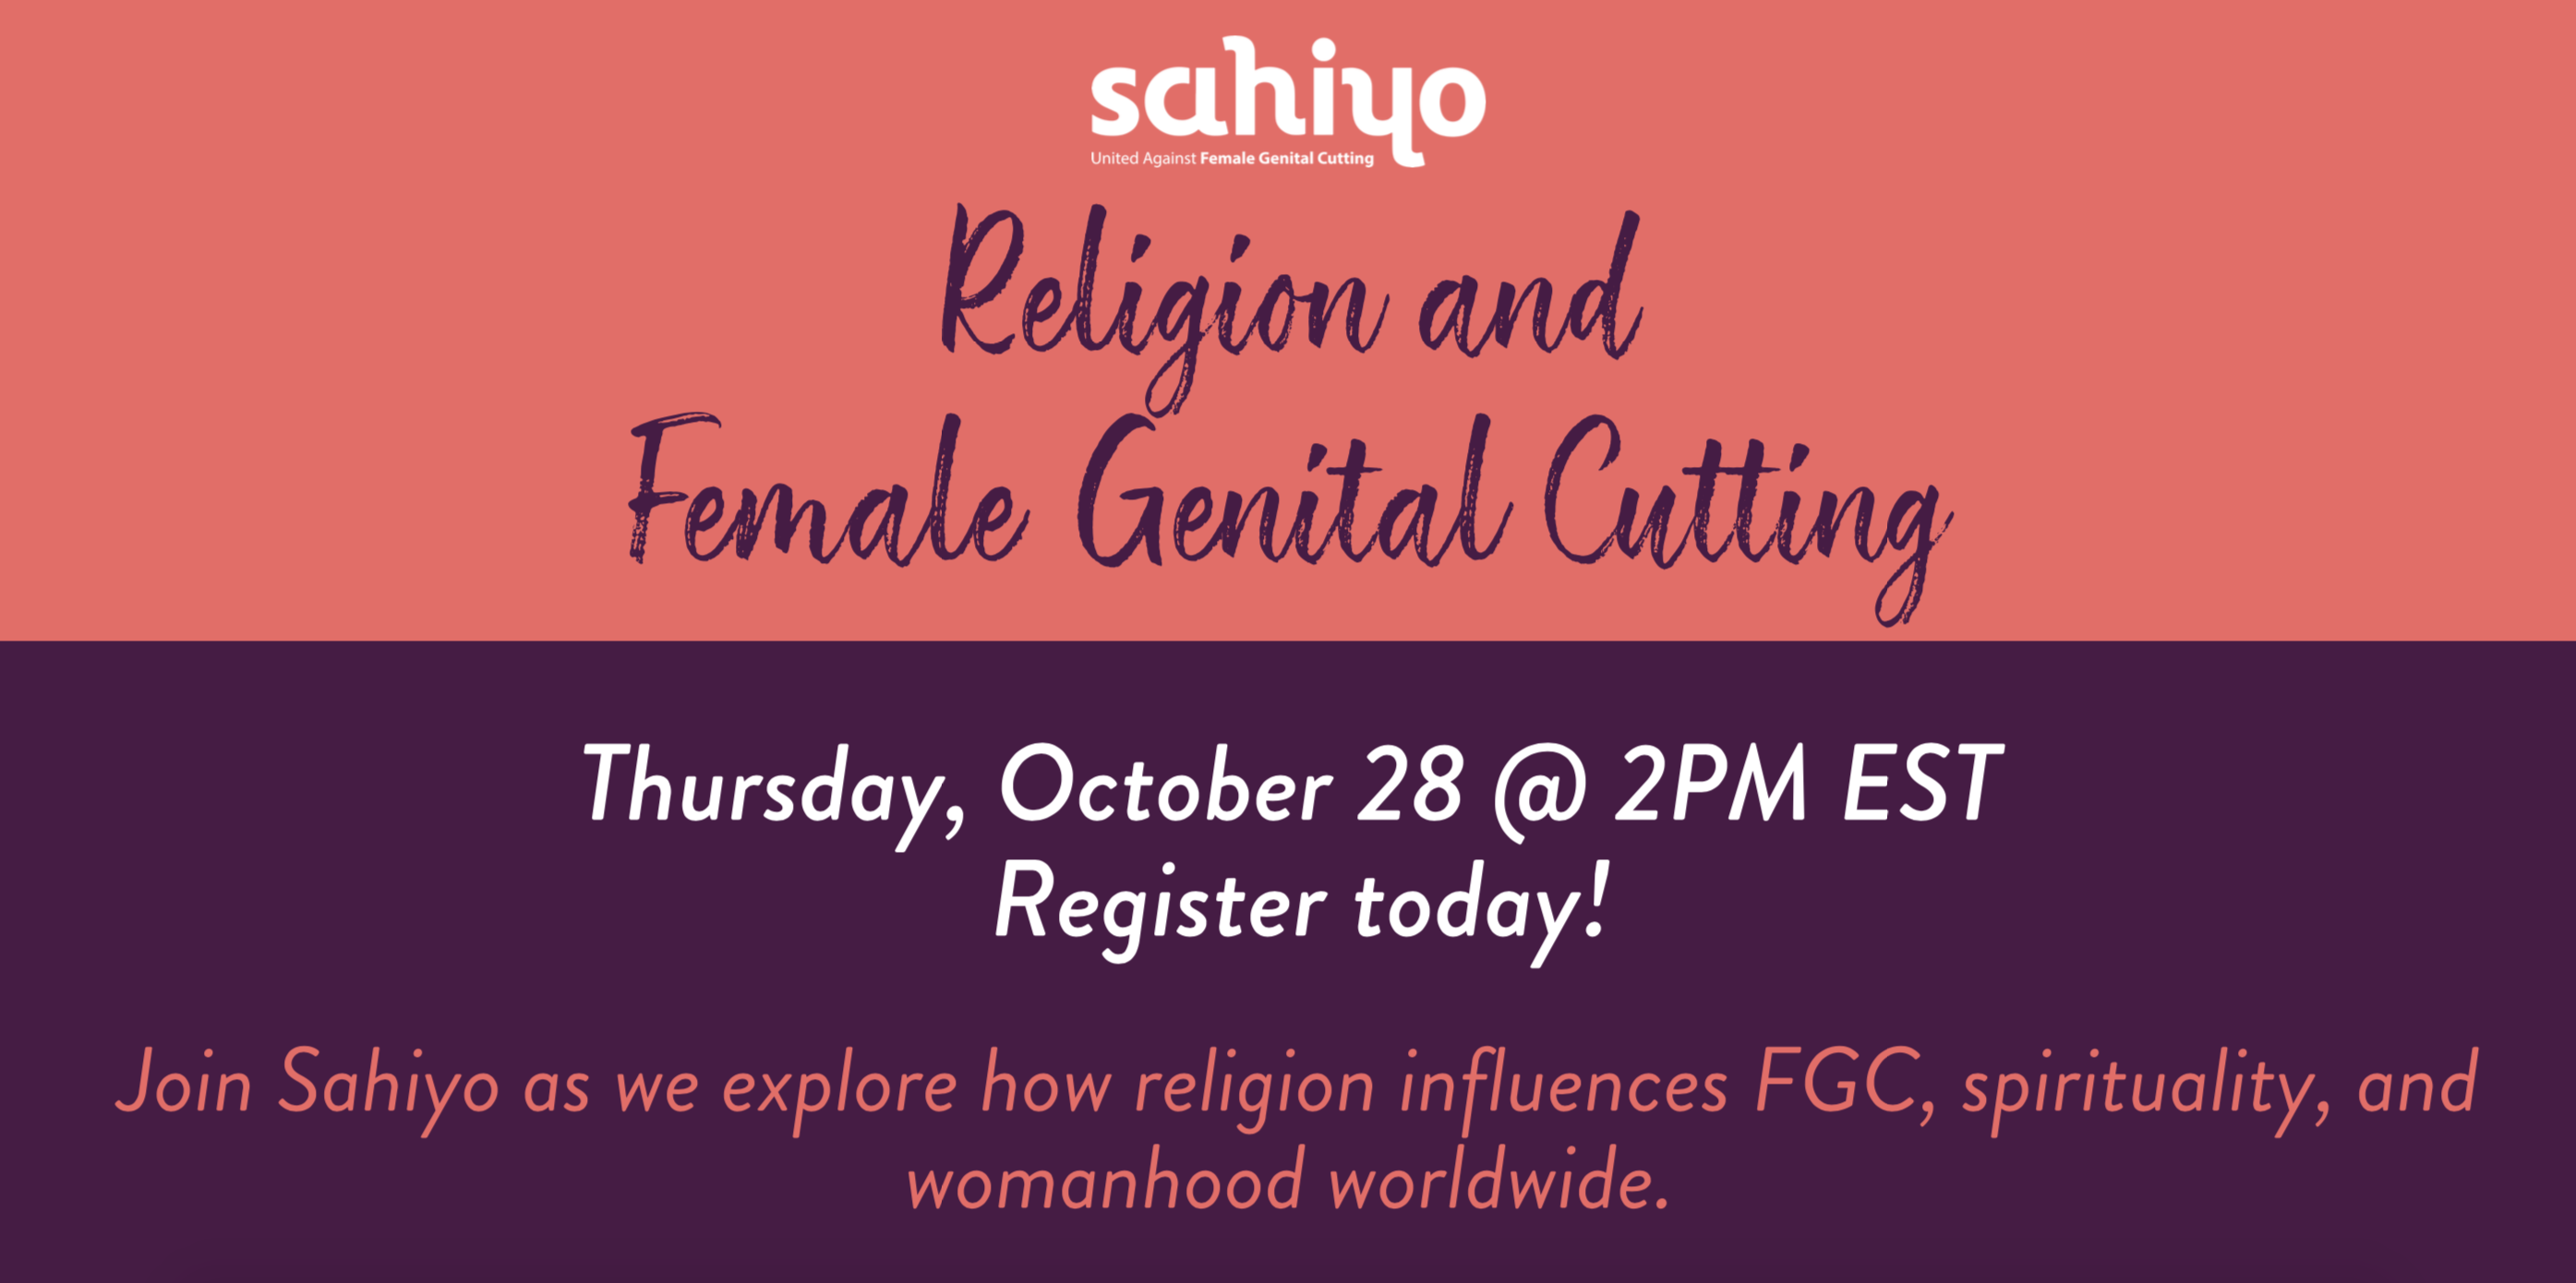 Upcoming webinar: Exploring the connections between religion and female genital cutting